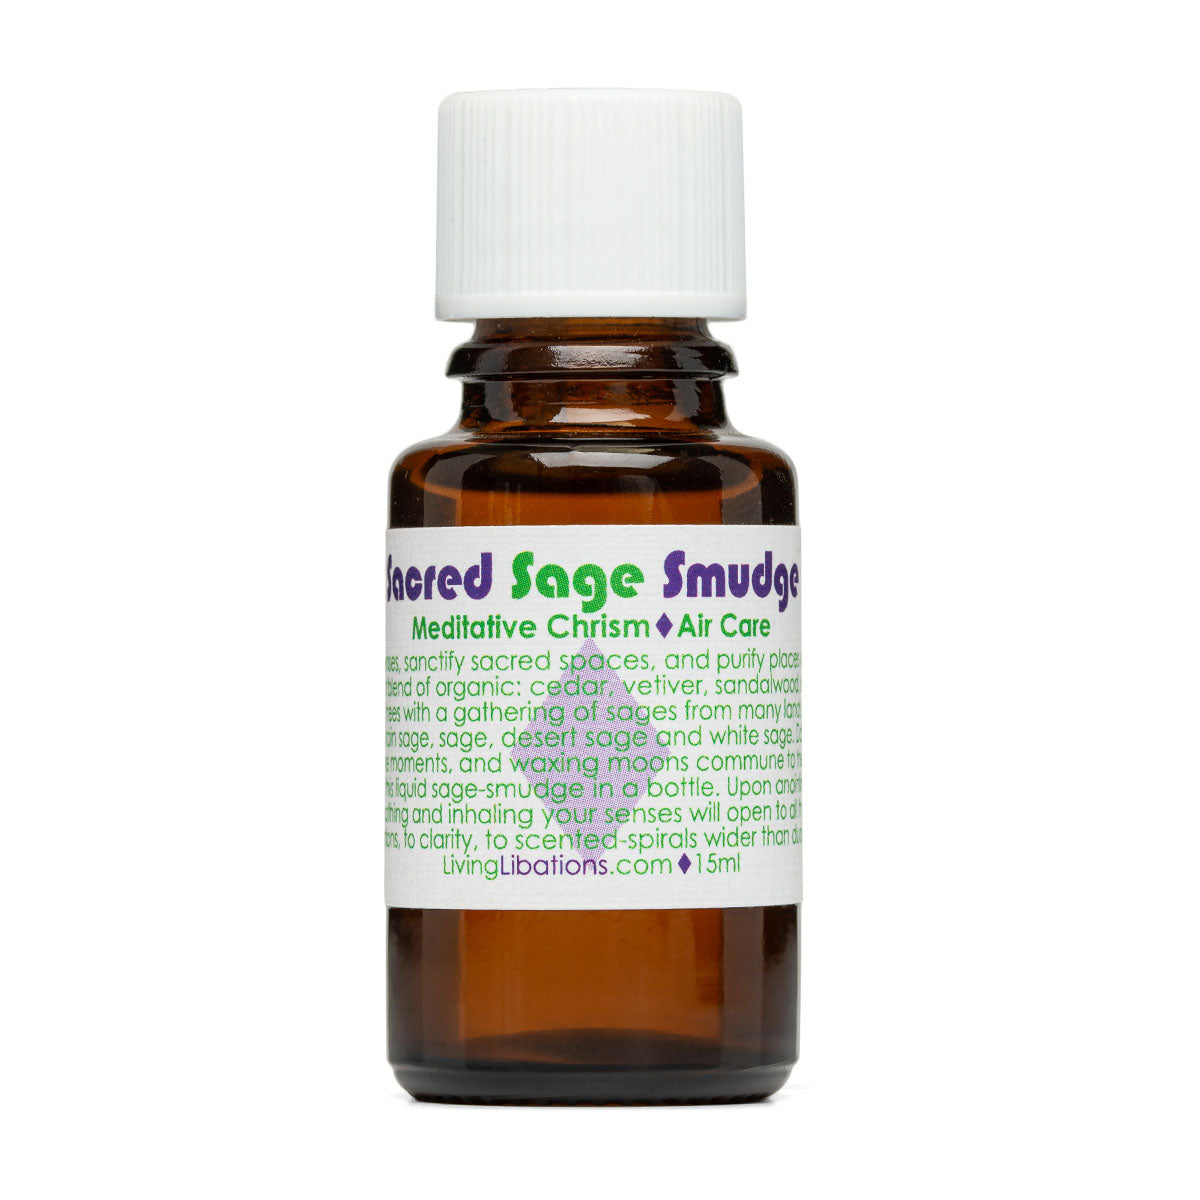 Sacred Sage Smudge Chrism | Living Libations | Raw Living UK | Fragrance | Living Libations Sacred Smudge Chrism (5, 15ml): anoint this Meditative Chrism, diffuse, use in a salt inhaler, or sanctify your bath with a couple of drops.